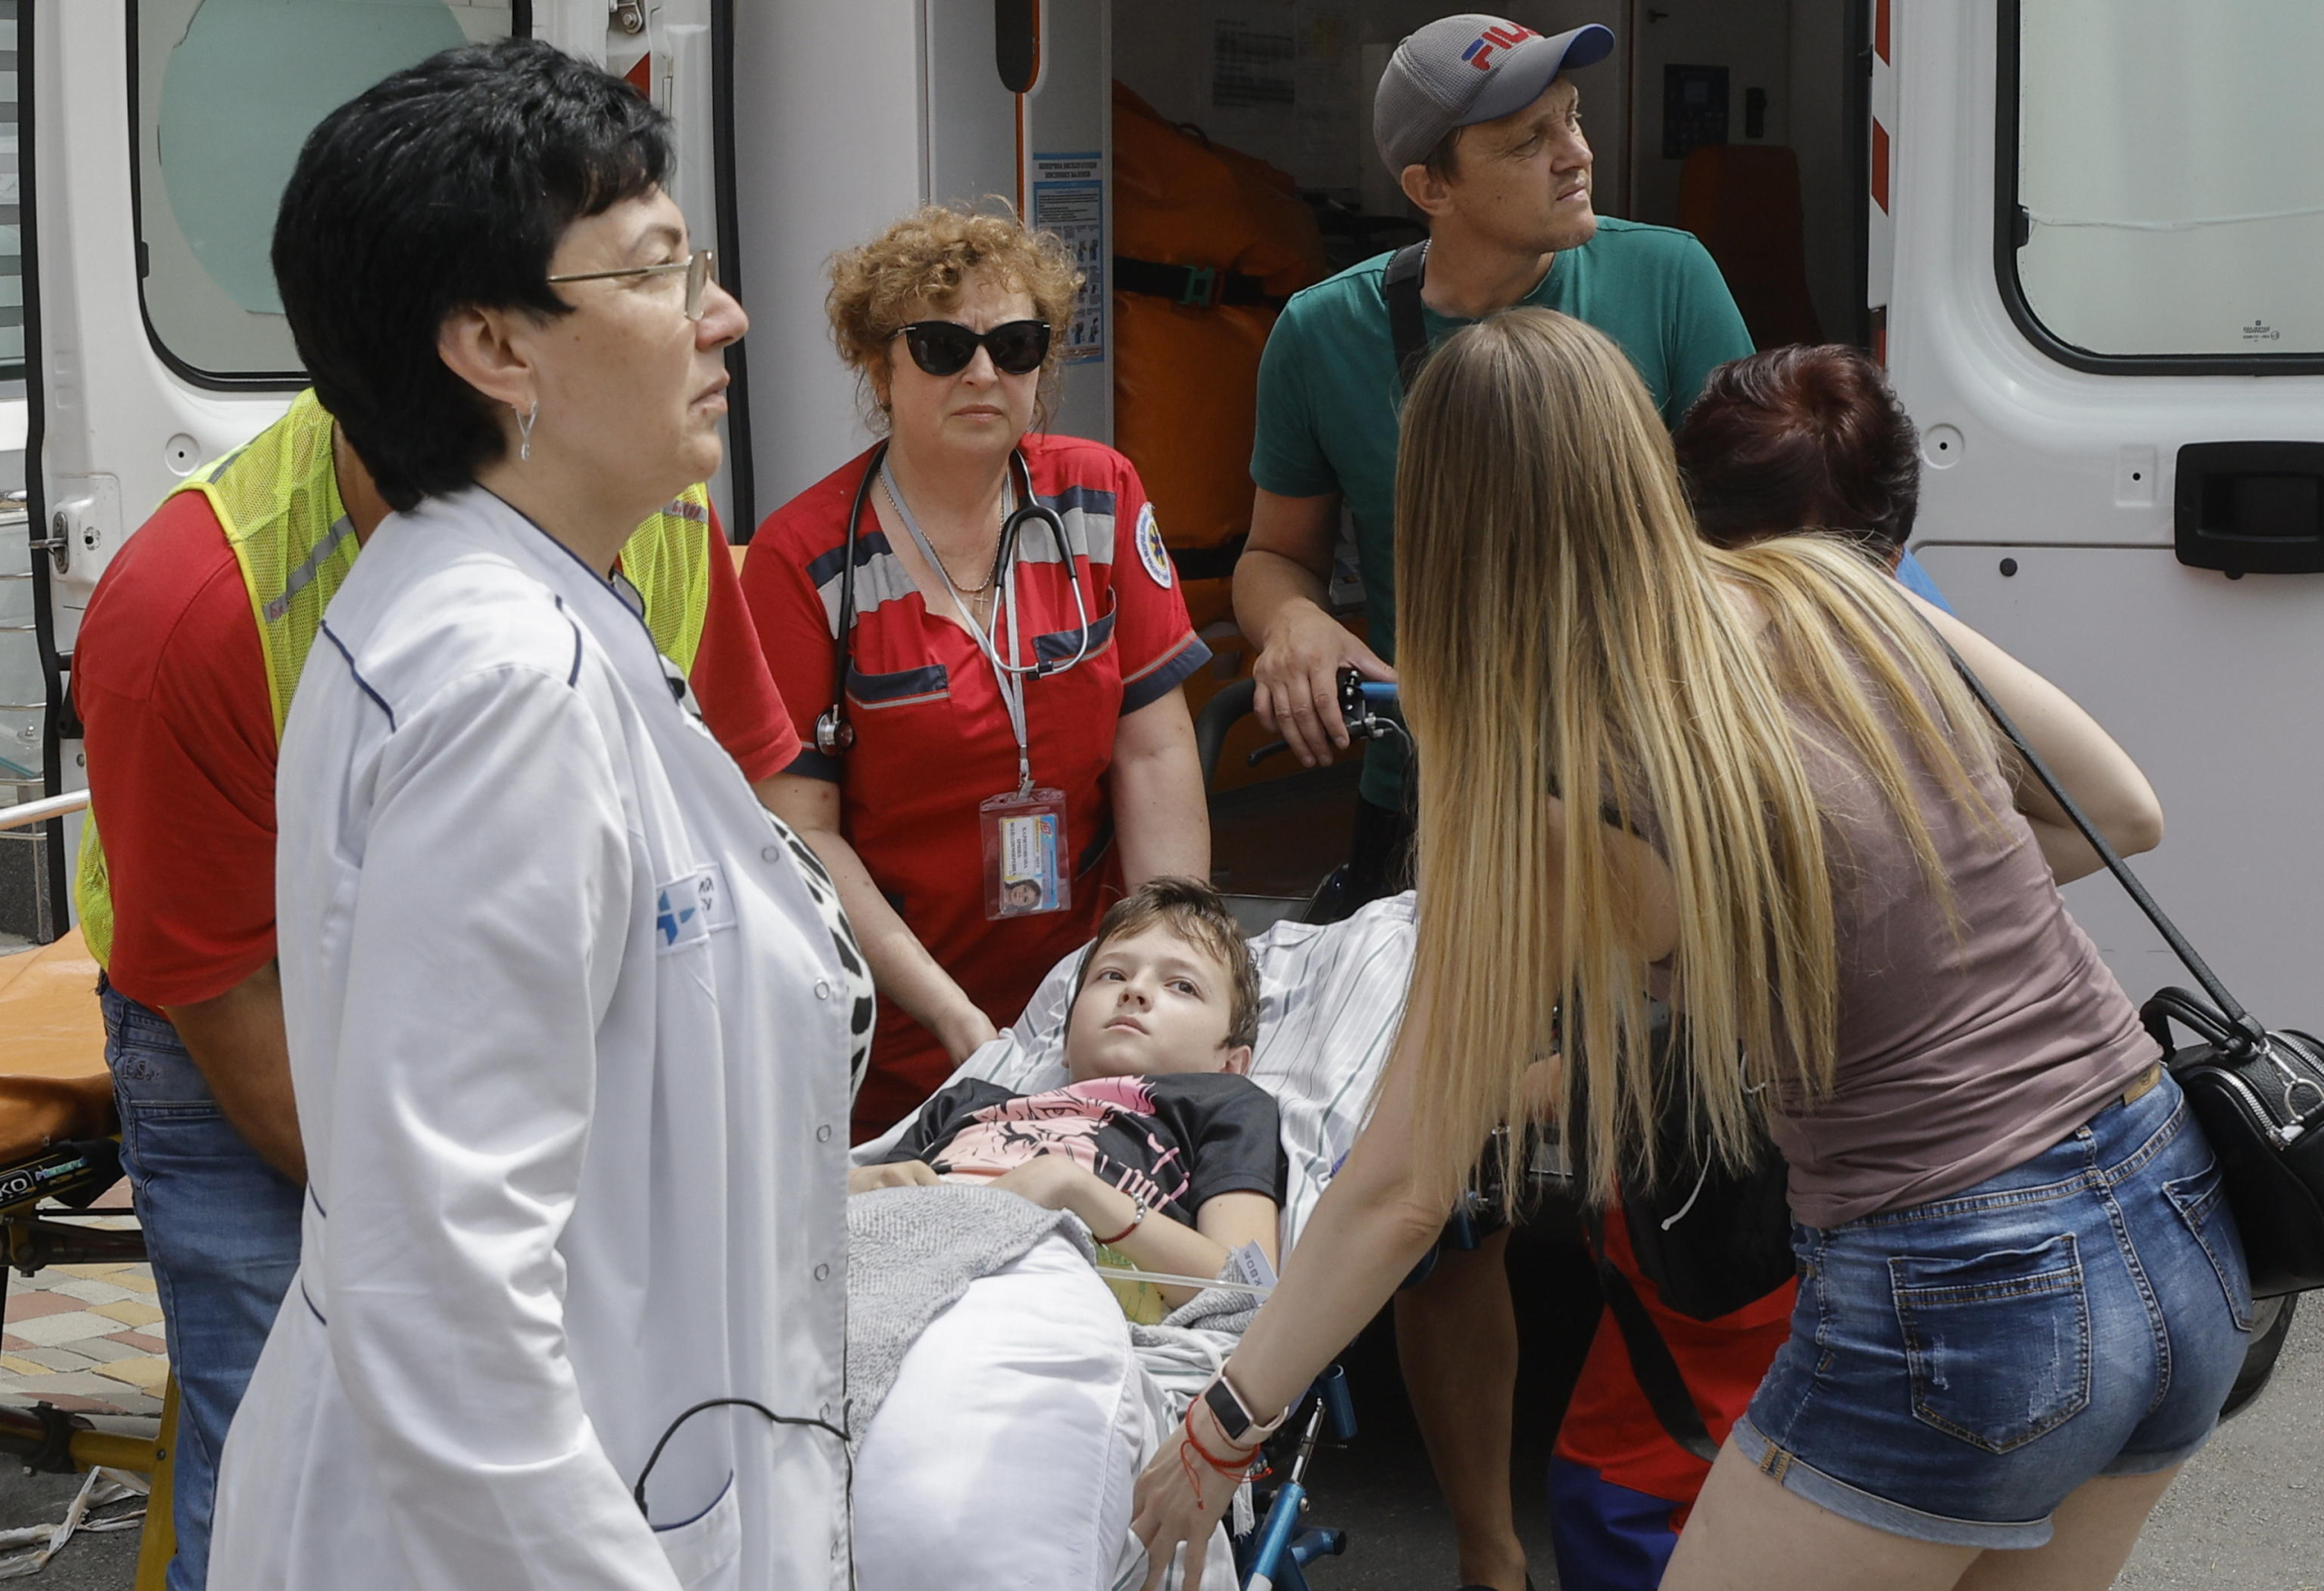 epa11466661 Medics attend to an injured child at the site of a rocket strike on the 'Okhmadyt' children's hospital in Kyiv, Ukraine, 08 July 2024 amid the undoing Russian invasion. Russia massively attacked Ukraine with missiles 08 July, striking Kyiv, Dnipro, Kryvyi Rih, Sloviansk and Kramatorsk. More than 40 missiles of different types were launched, striking residential buildings, infrastructure and the children's hospital. At least seven people were killed and 25 injured as result of shelling in Kyiv according to the State Emergency Service report.  EPA/SERGEY DOLZHENKO